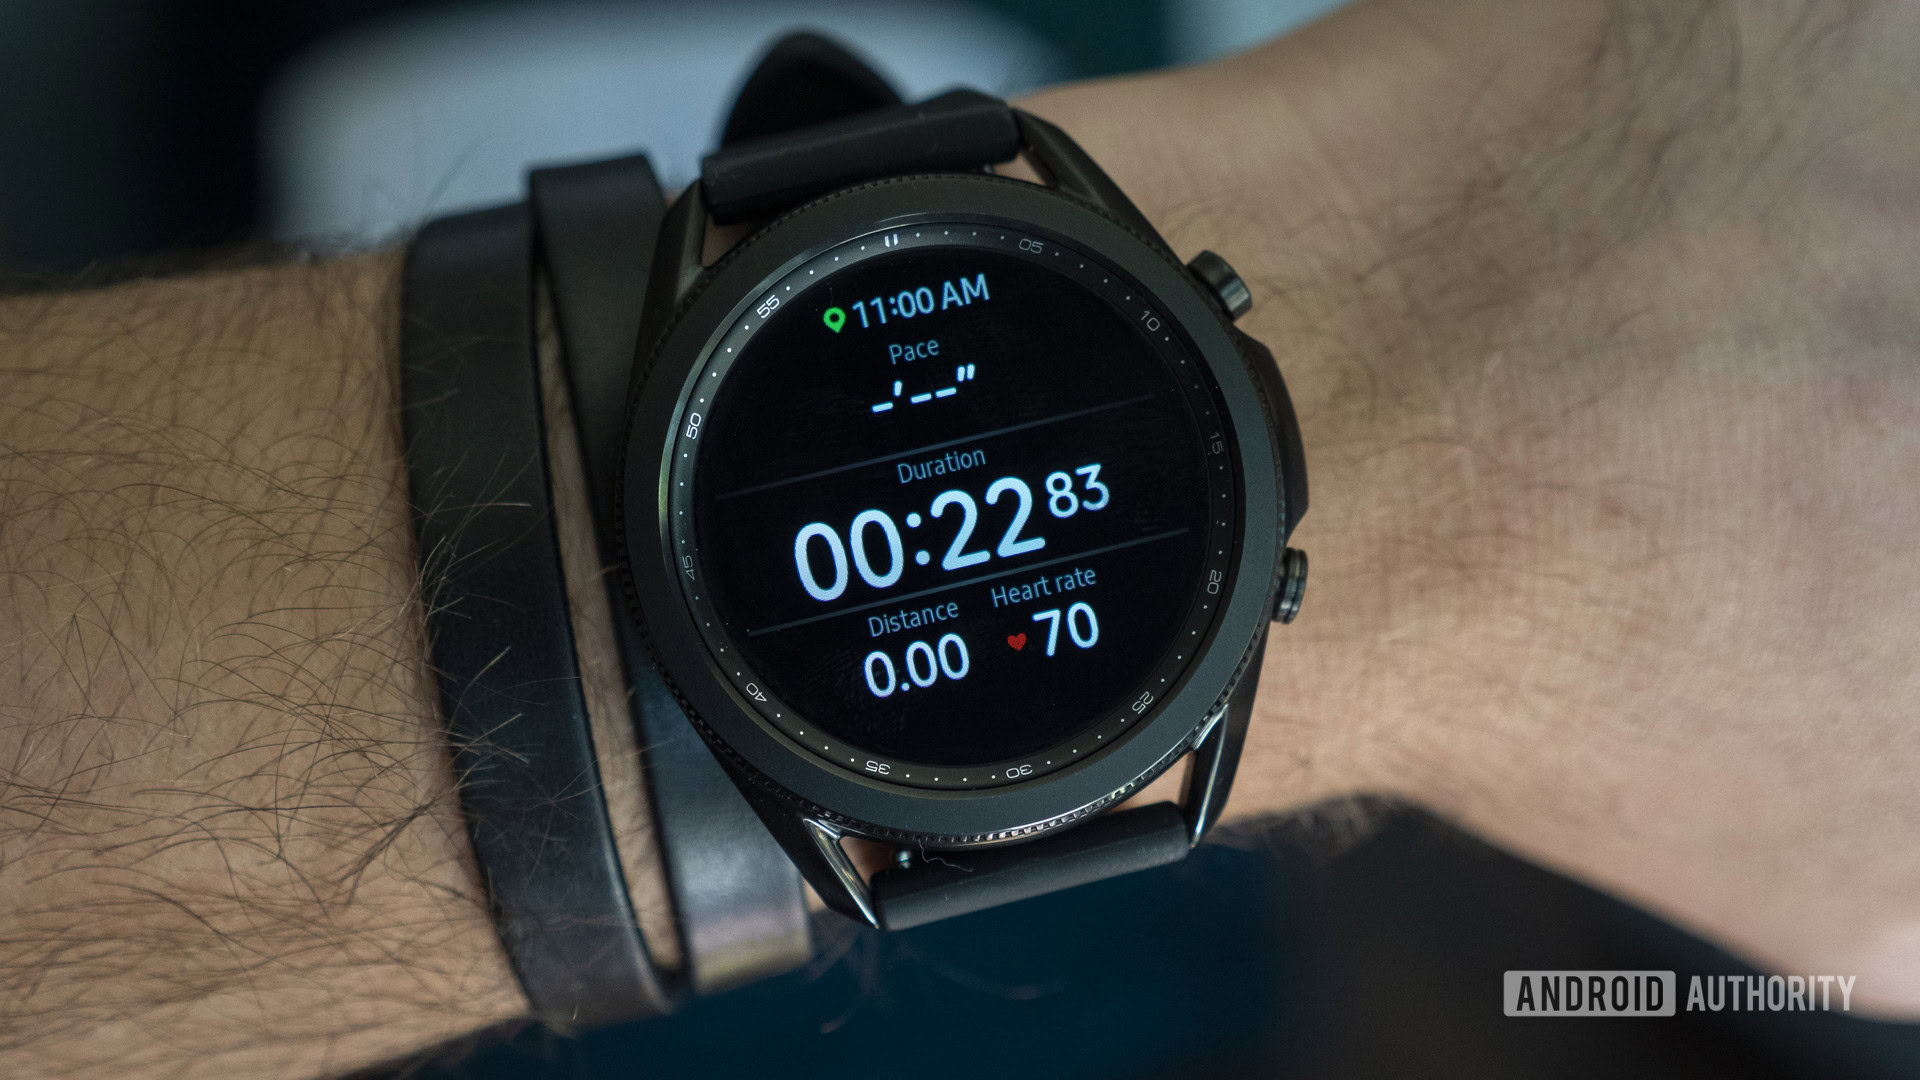 The Samsung smartwatches you can buy - Android Authority